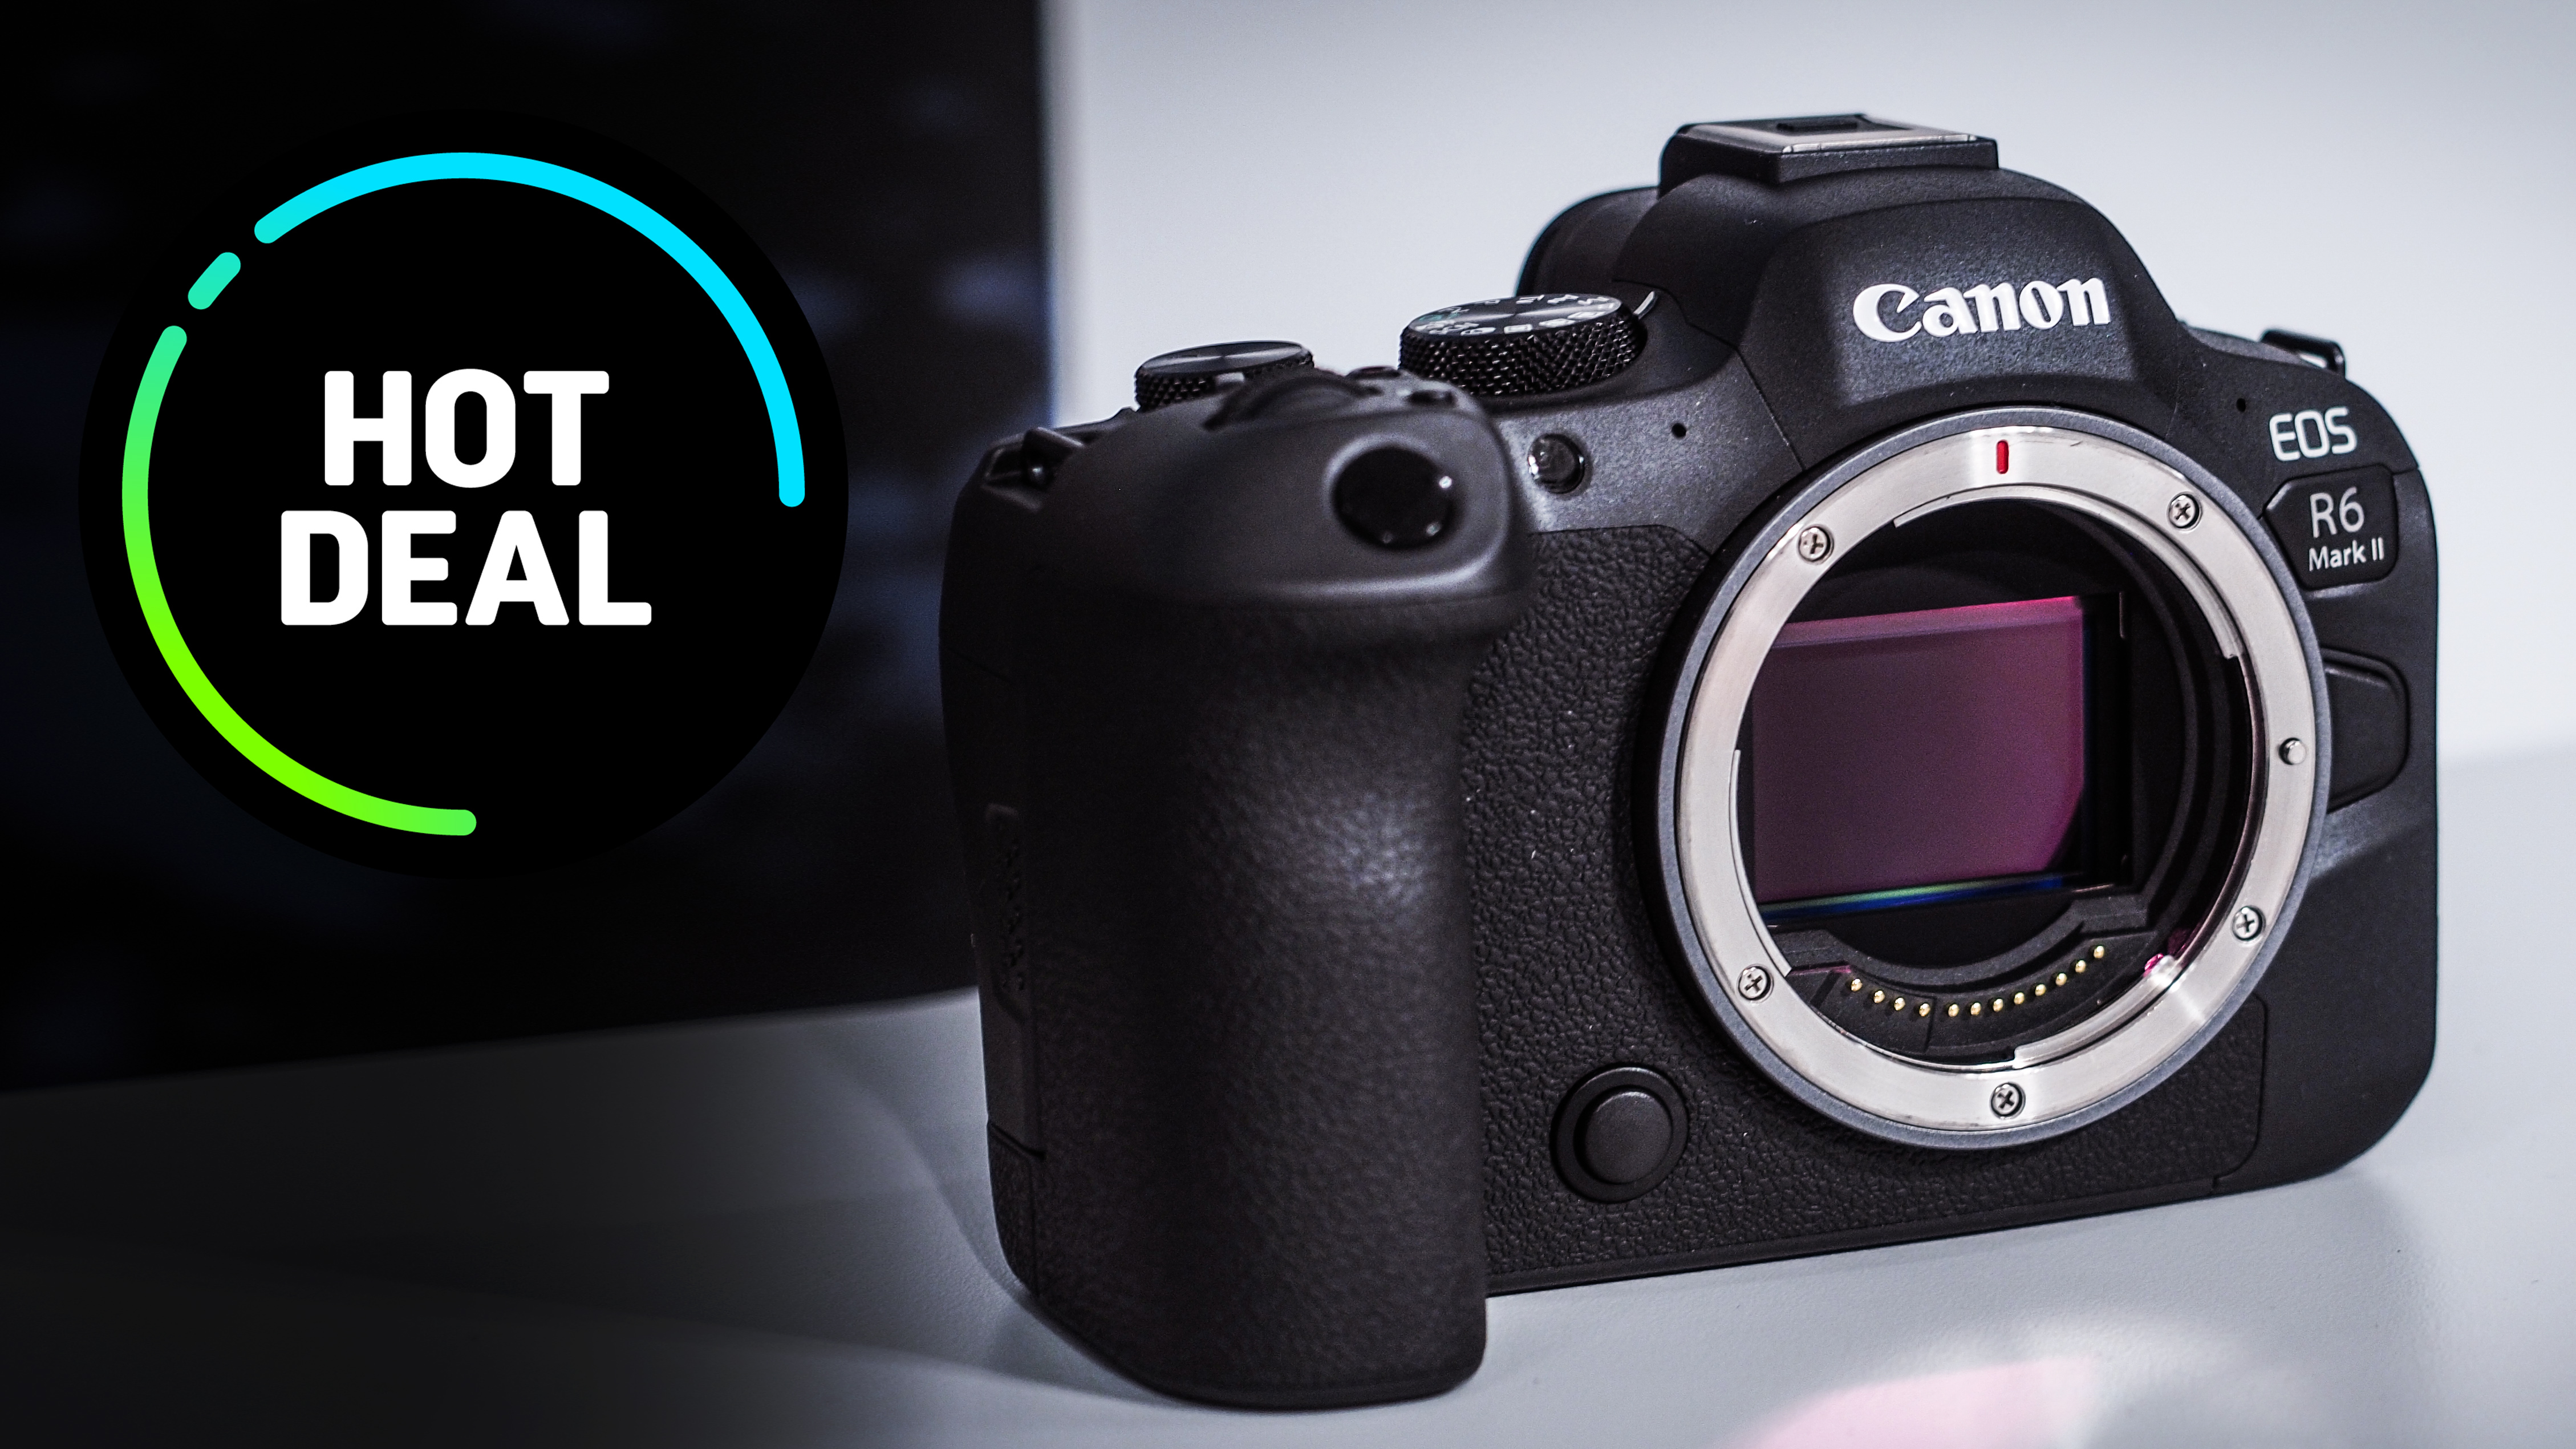 Canon R6 Mark II drops to its lowest price ever!